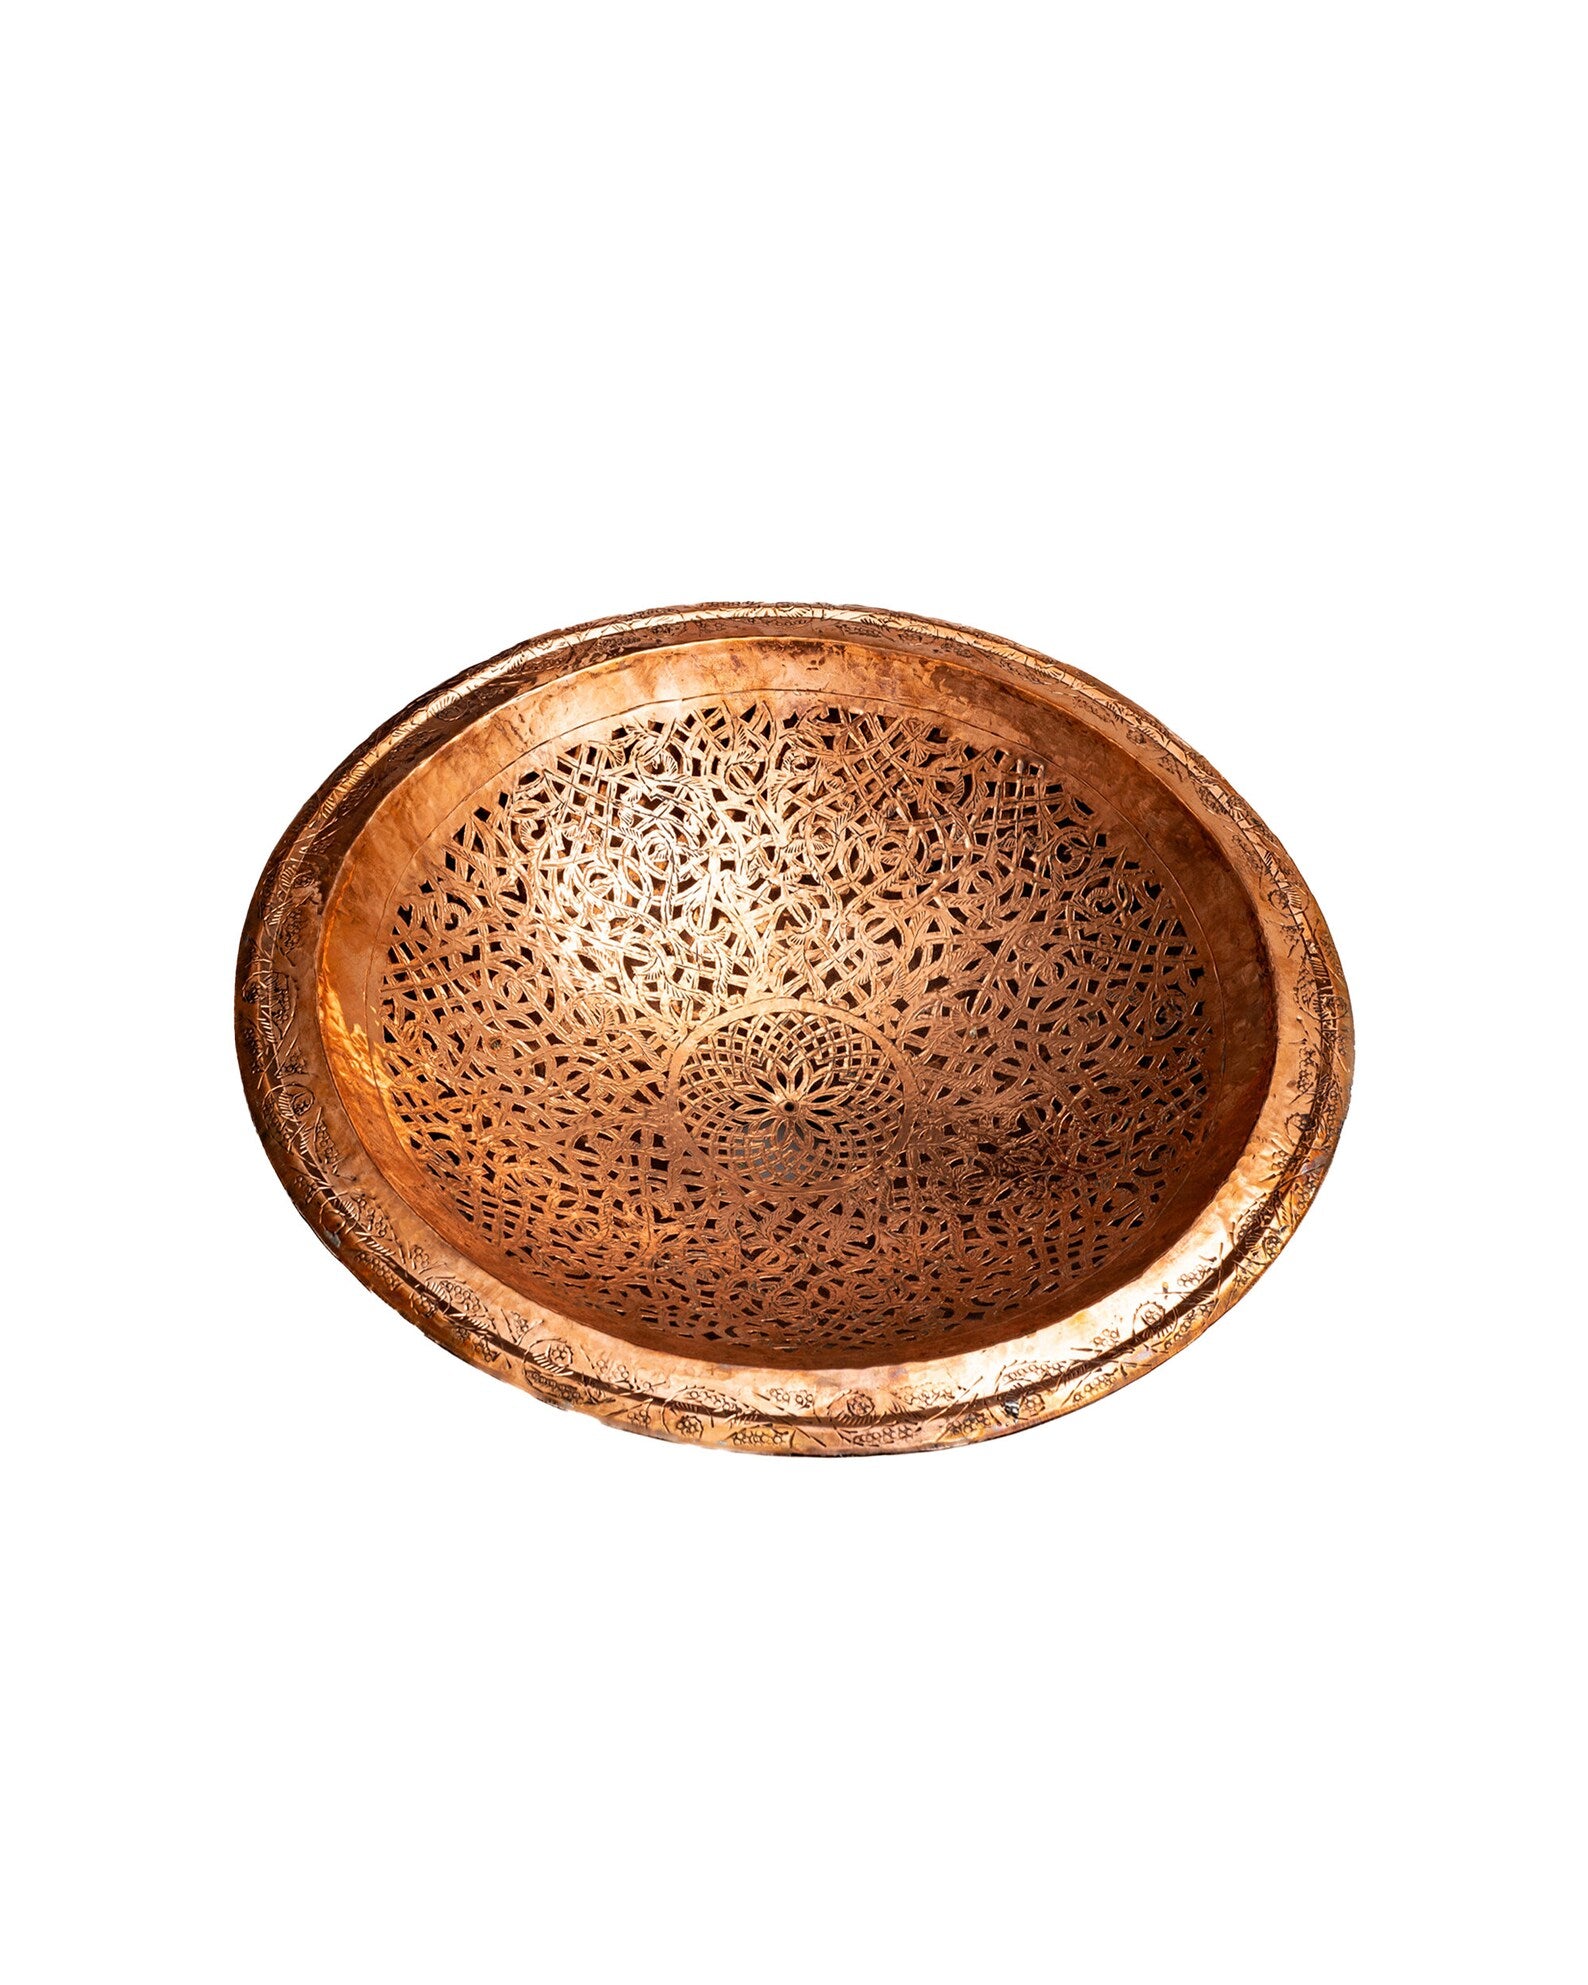 Round Copper drop-in bathroom sink , Handcrafted engraved copper sink - Zayian